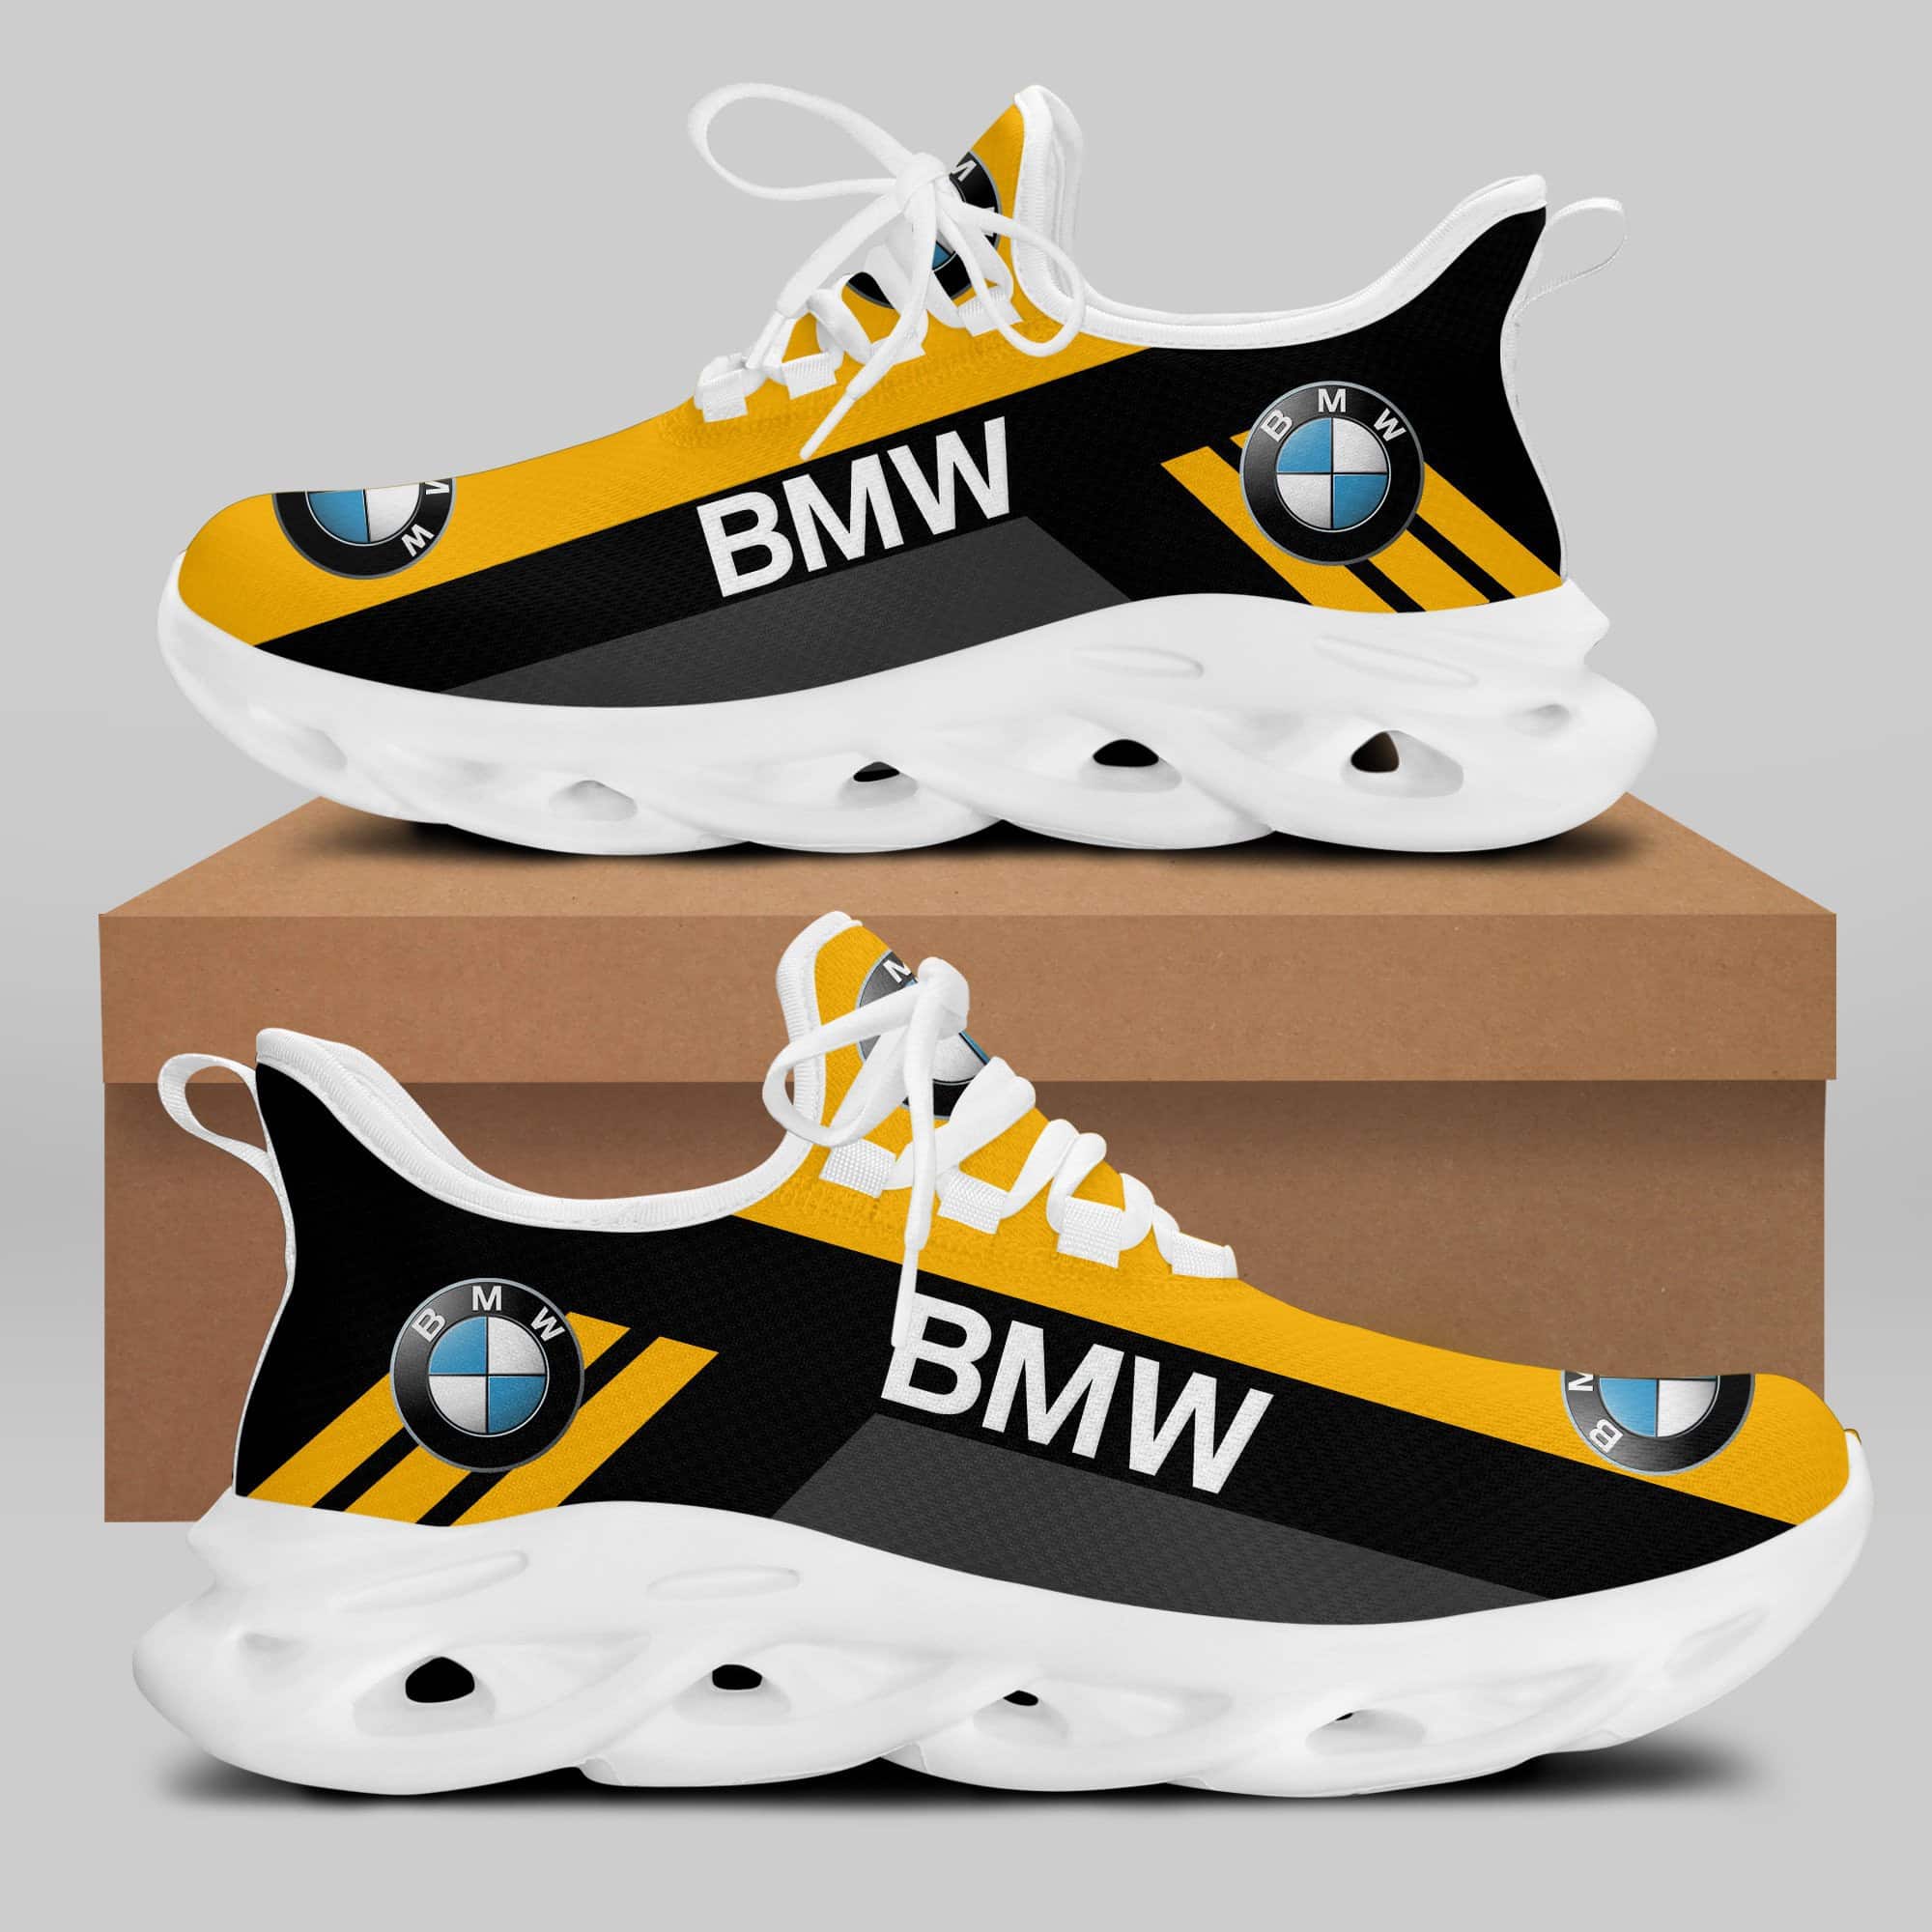 Bmw Running Shoes Max Soul Shoes Sneakers Ver 22 2